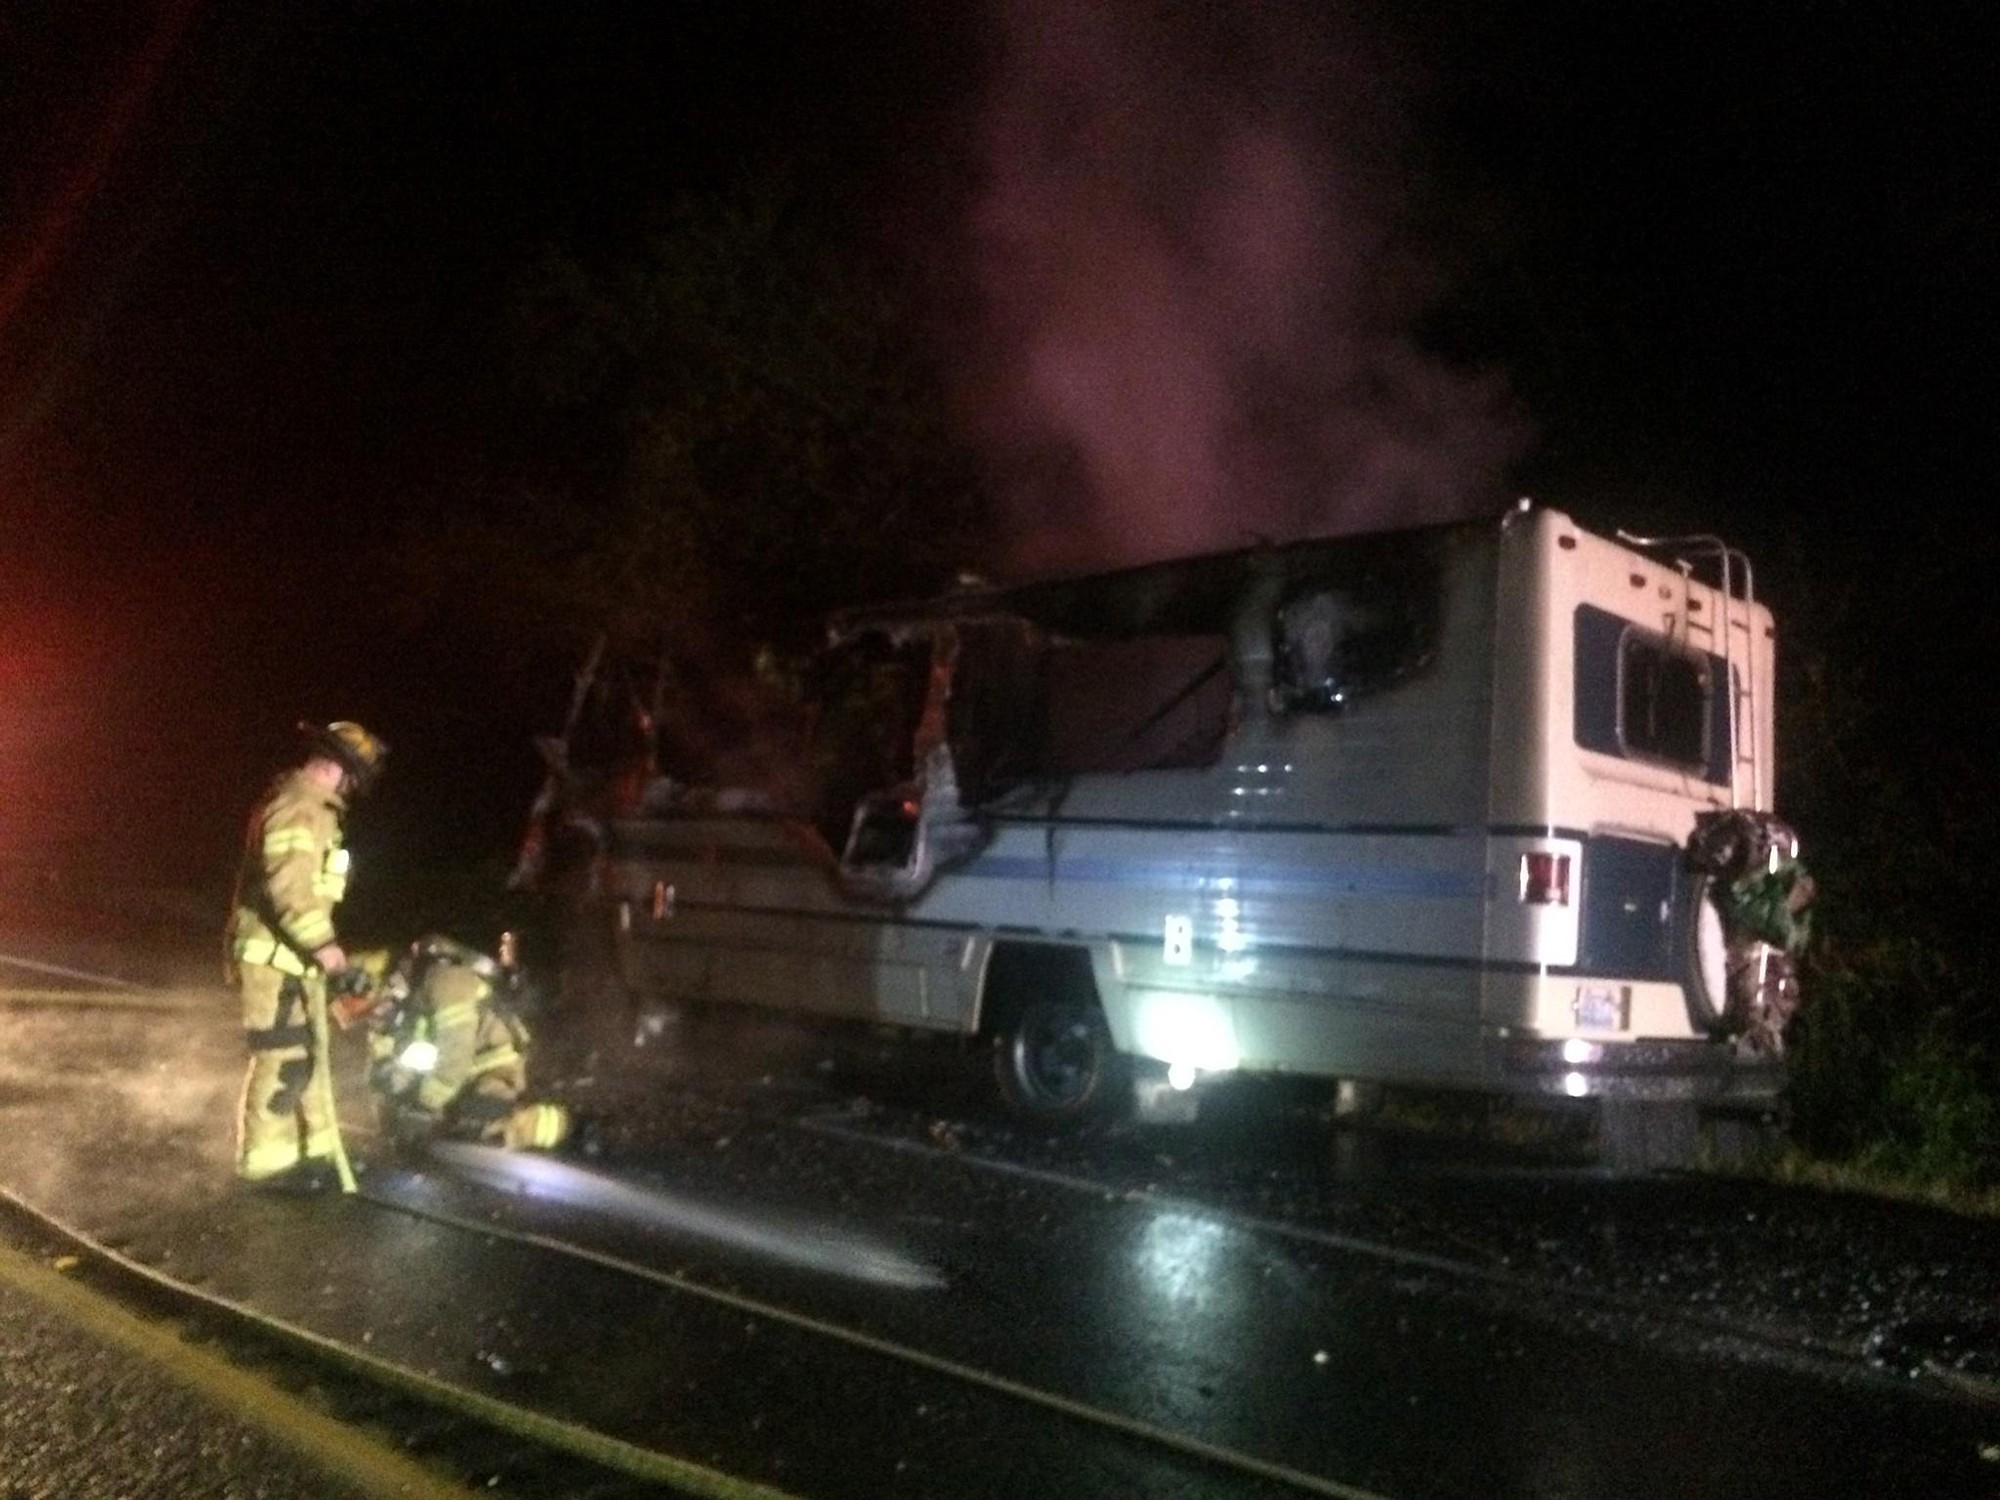 Dan Yager/Clark County Fire 
Firefighters put out a blaze late Monday night in a motor home on state Highway 503 near Northeast 321st Street. The recreational vehicle was reported as a total loss.